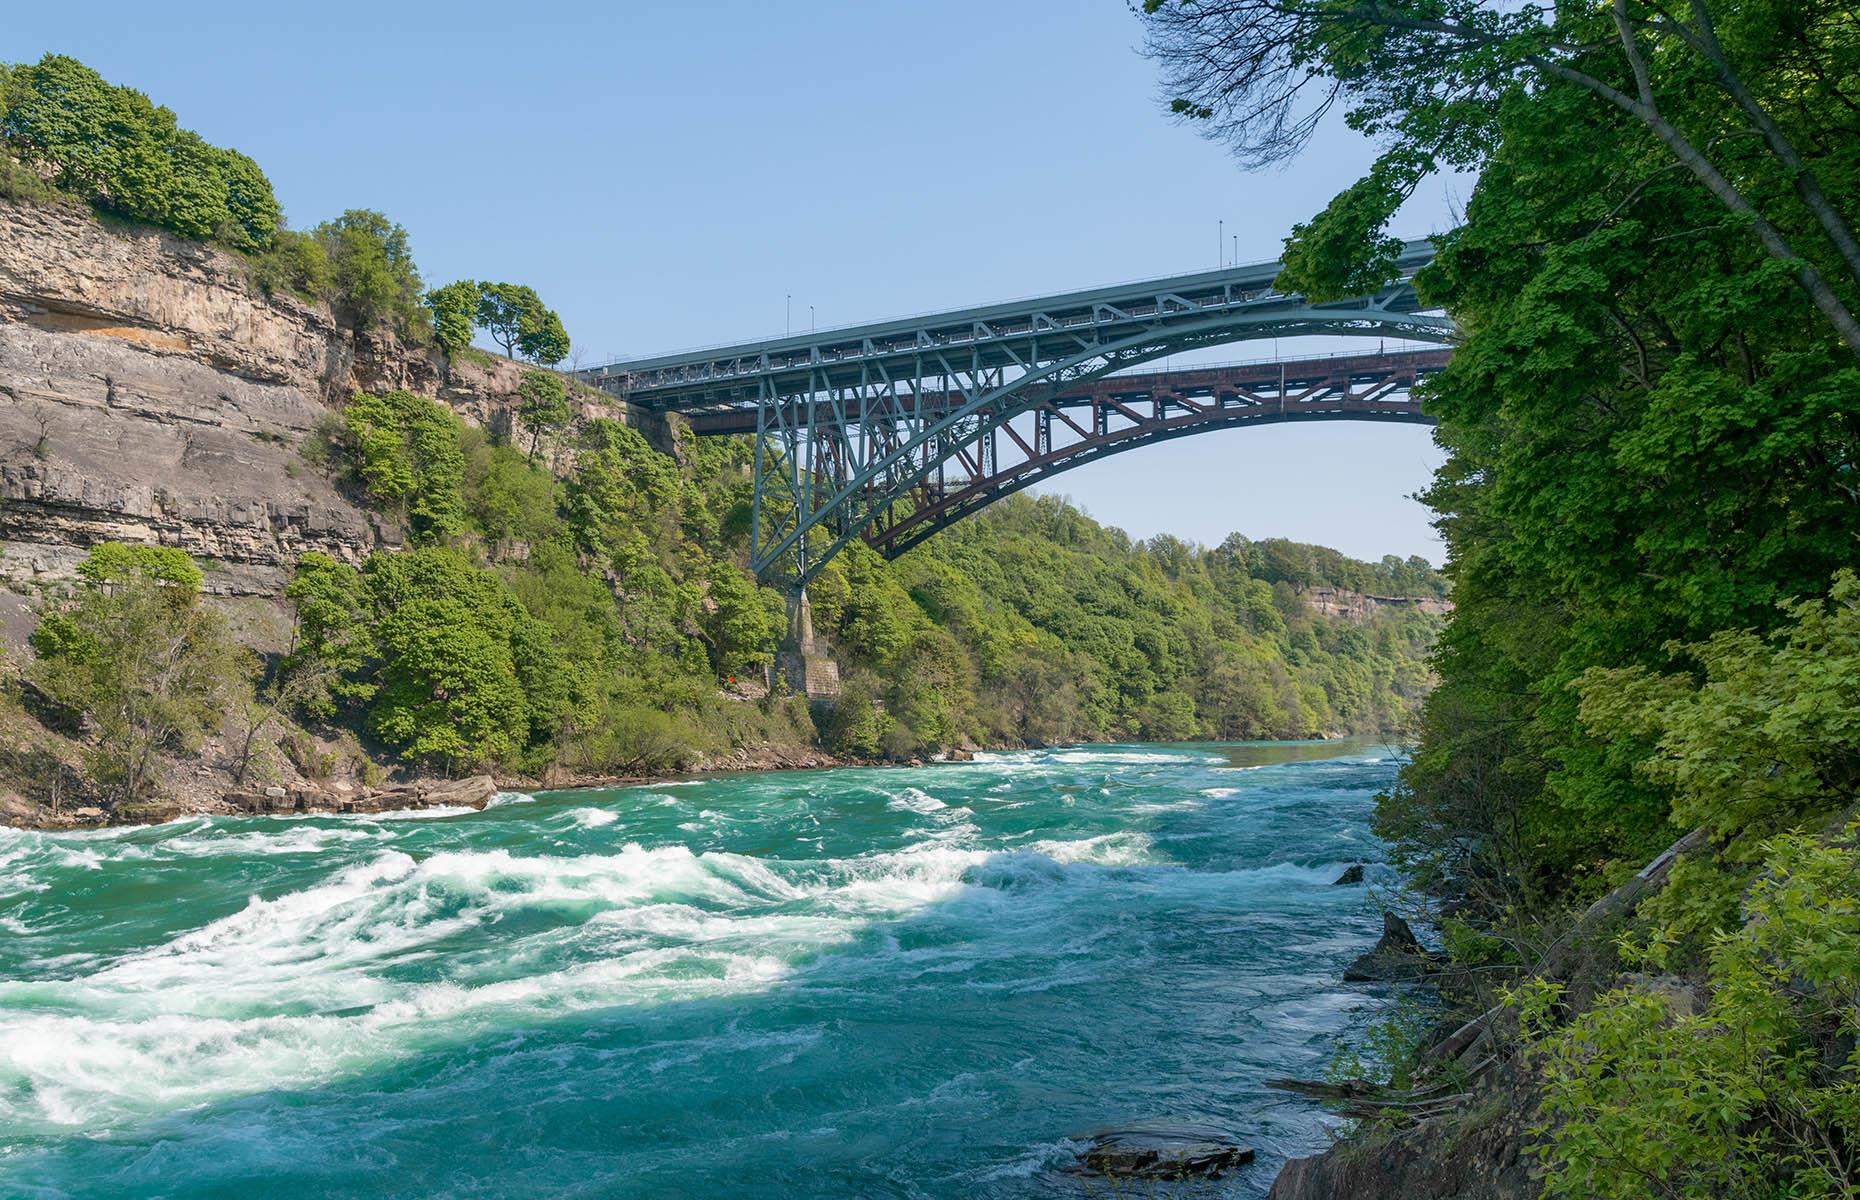 <p>Once you’re face-to-face with the Niagara River, take full advantage of the lookout points scattered throughout the quarter-mile boardwalk. When you get to the first platform, looking upriver, get your camera out. The Whirlpool Rapids Railroad Bridge will frame your shot perfectly.</p>  <p>The <a href="https://www.niagaraparks.com/visit/attractions/white-water-walk">self-guided tour</a> allows you to stop and read the stories and facts about the geology of the Great Gorge, as well as the plant and animal life surrounding it. Give the American tourists across the river a wave; you’ll spot a few doing a similar walk on the US side.</p>